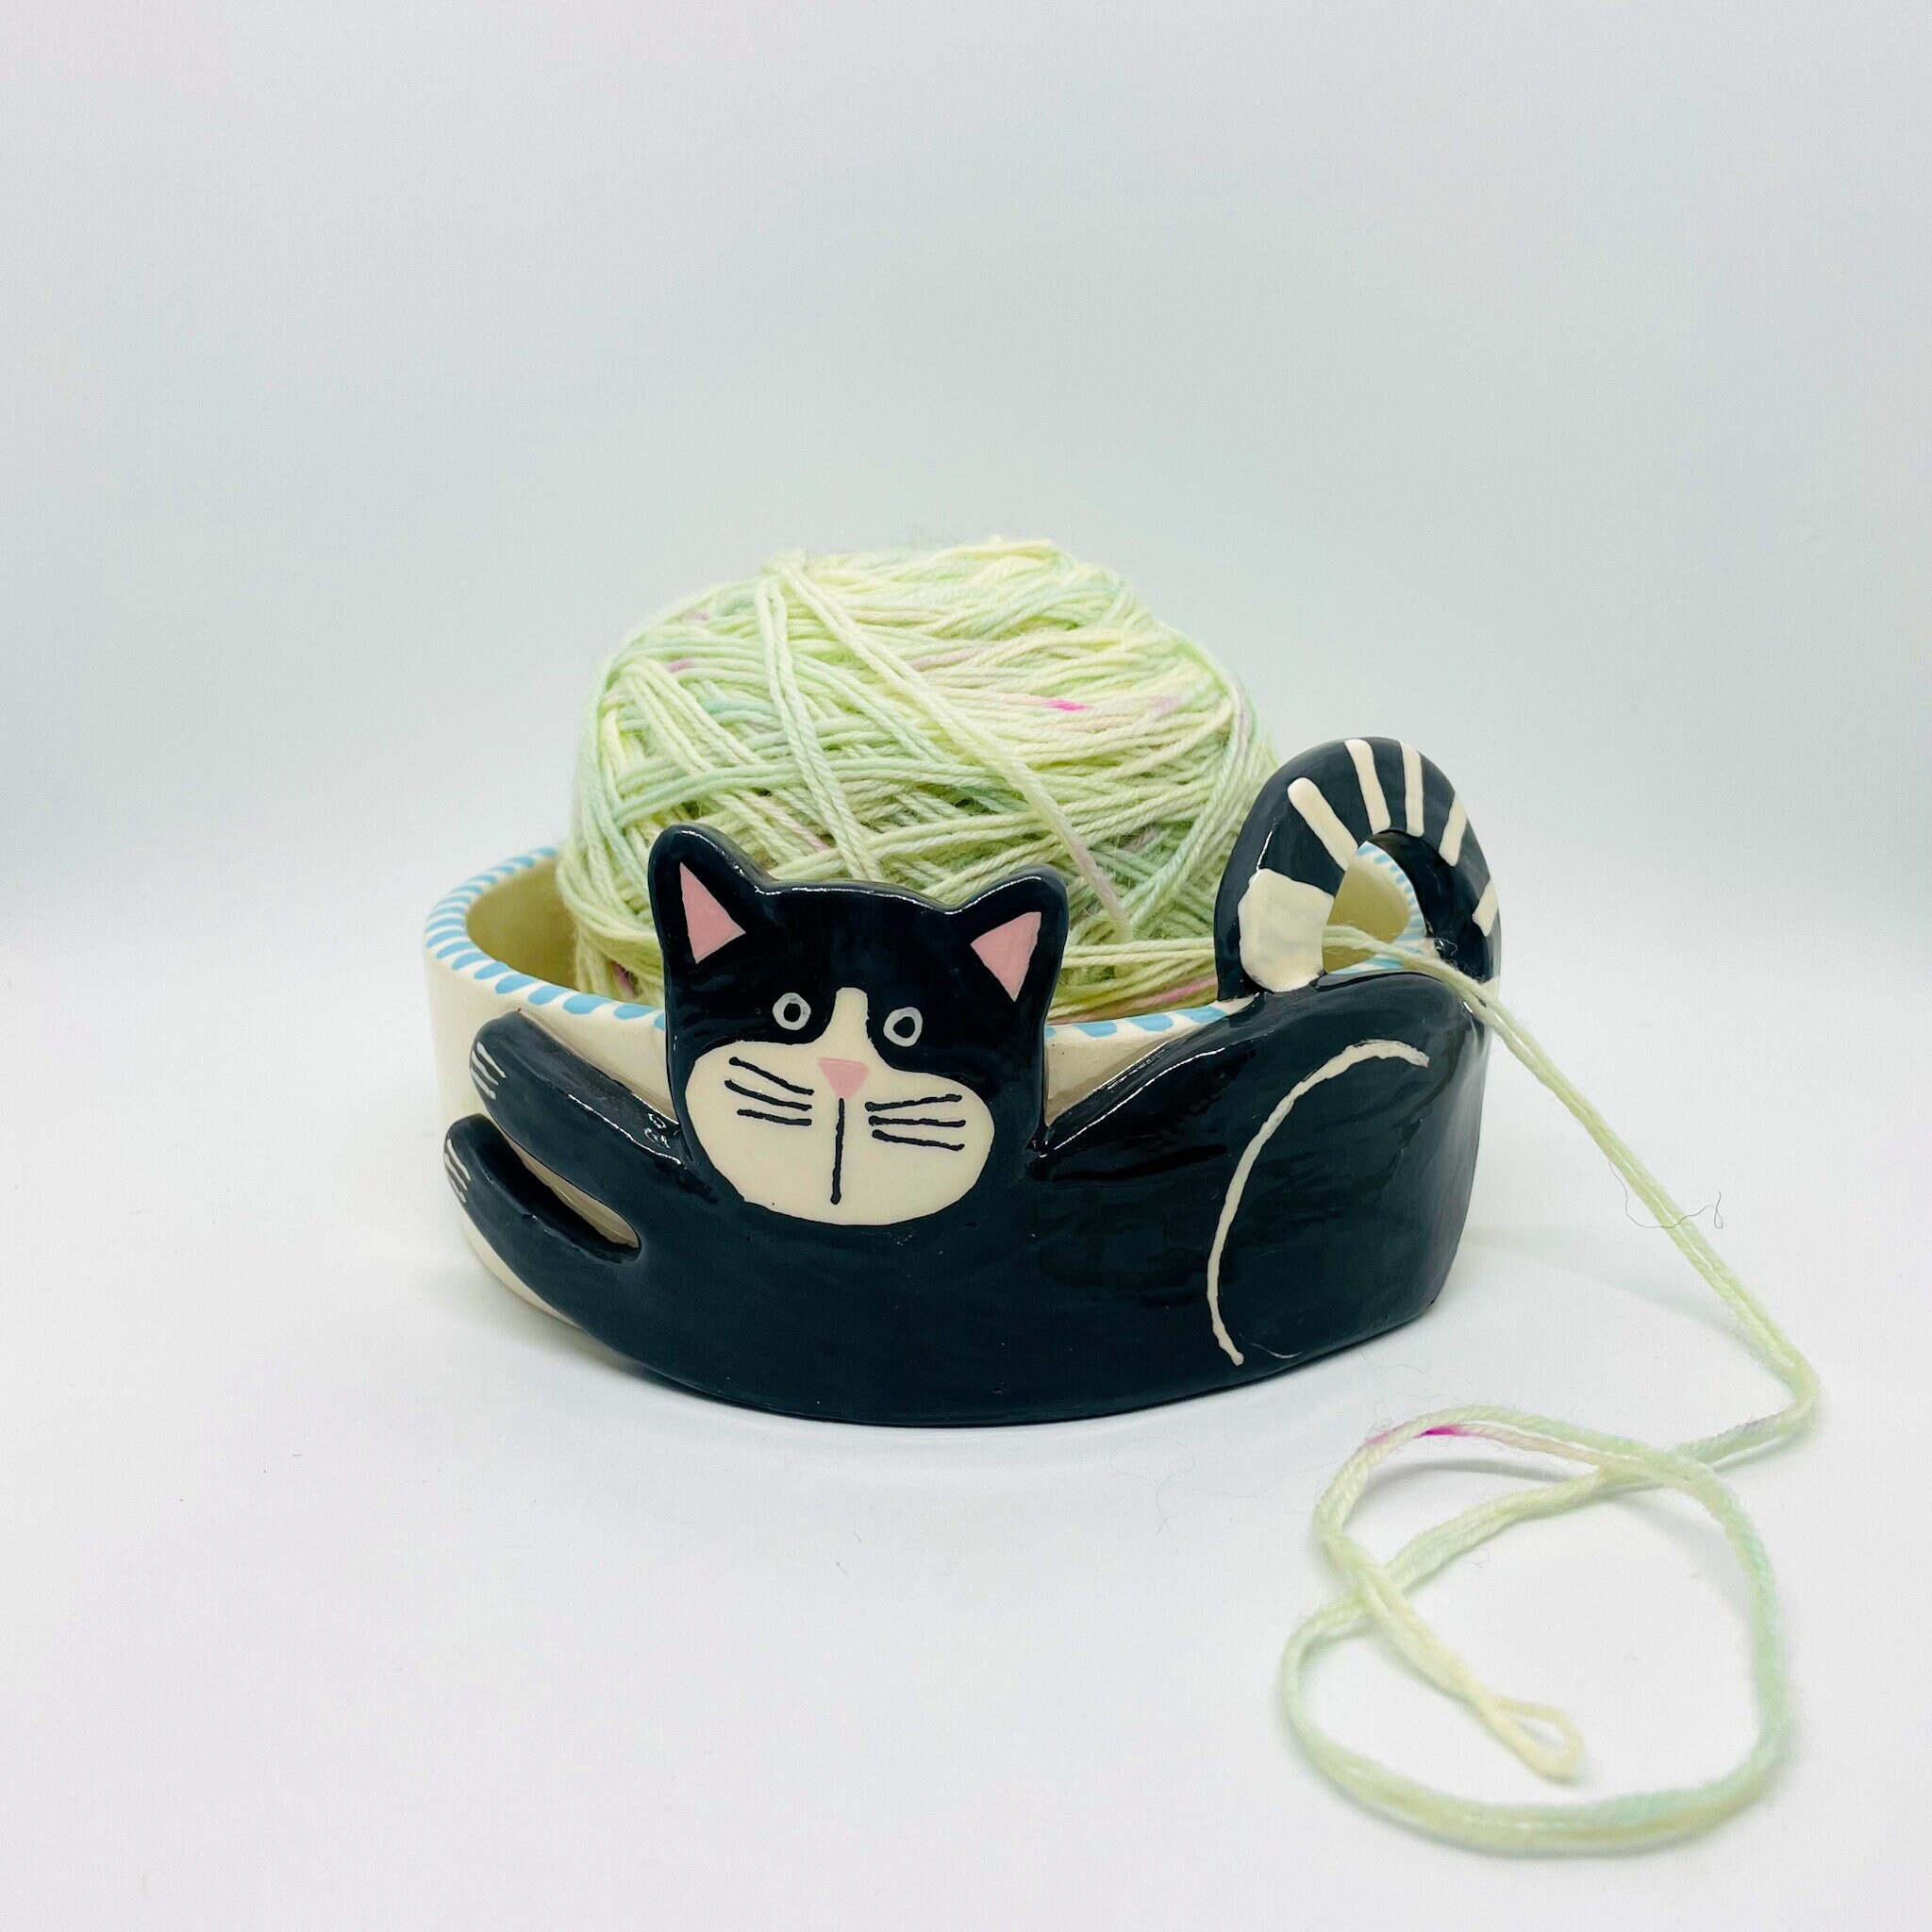 Ceramic Cat Yarn Bowl for Knitting and Crocheting. This Decorative Wool  Holder/Yarn Organizer Makes a Great Gift for Crochet Lovers. (Cat)